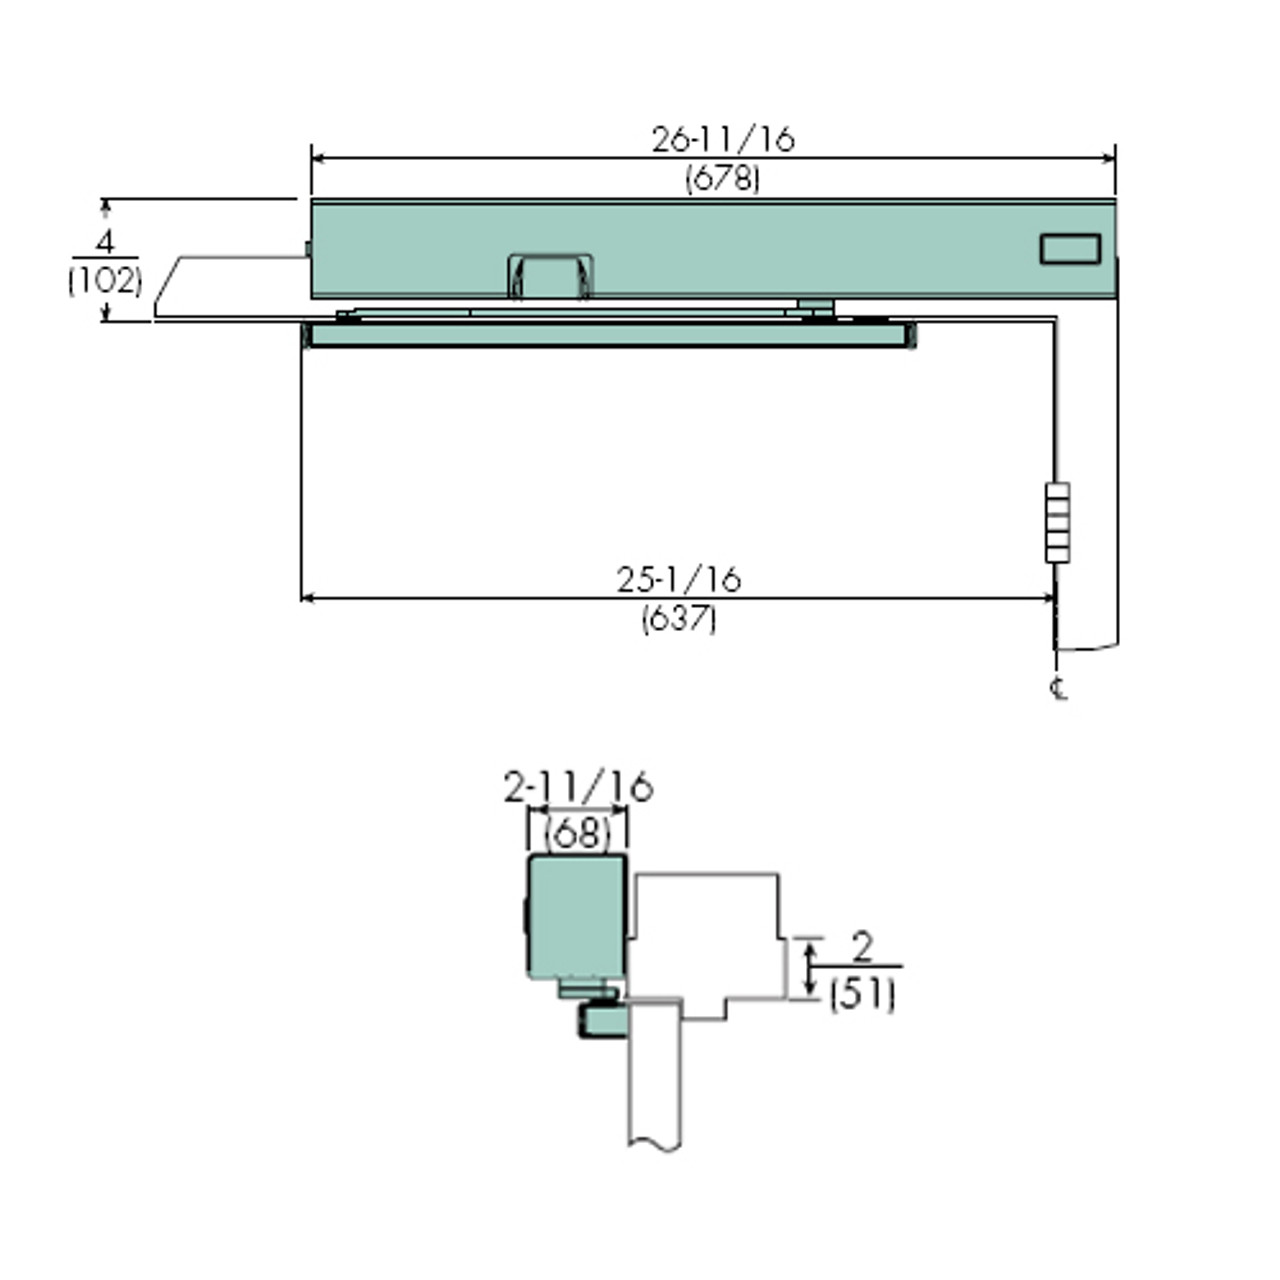 7155SZ-DZ-RH-120VAC-691 Norton 7100SZ Series Safe Zone Multi-Point Closer/Holder with Motion Sensor and Pull Side Double Egress Arm and Slide Track in Dull Bronze Finish